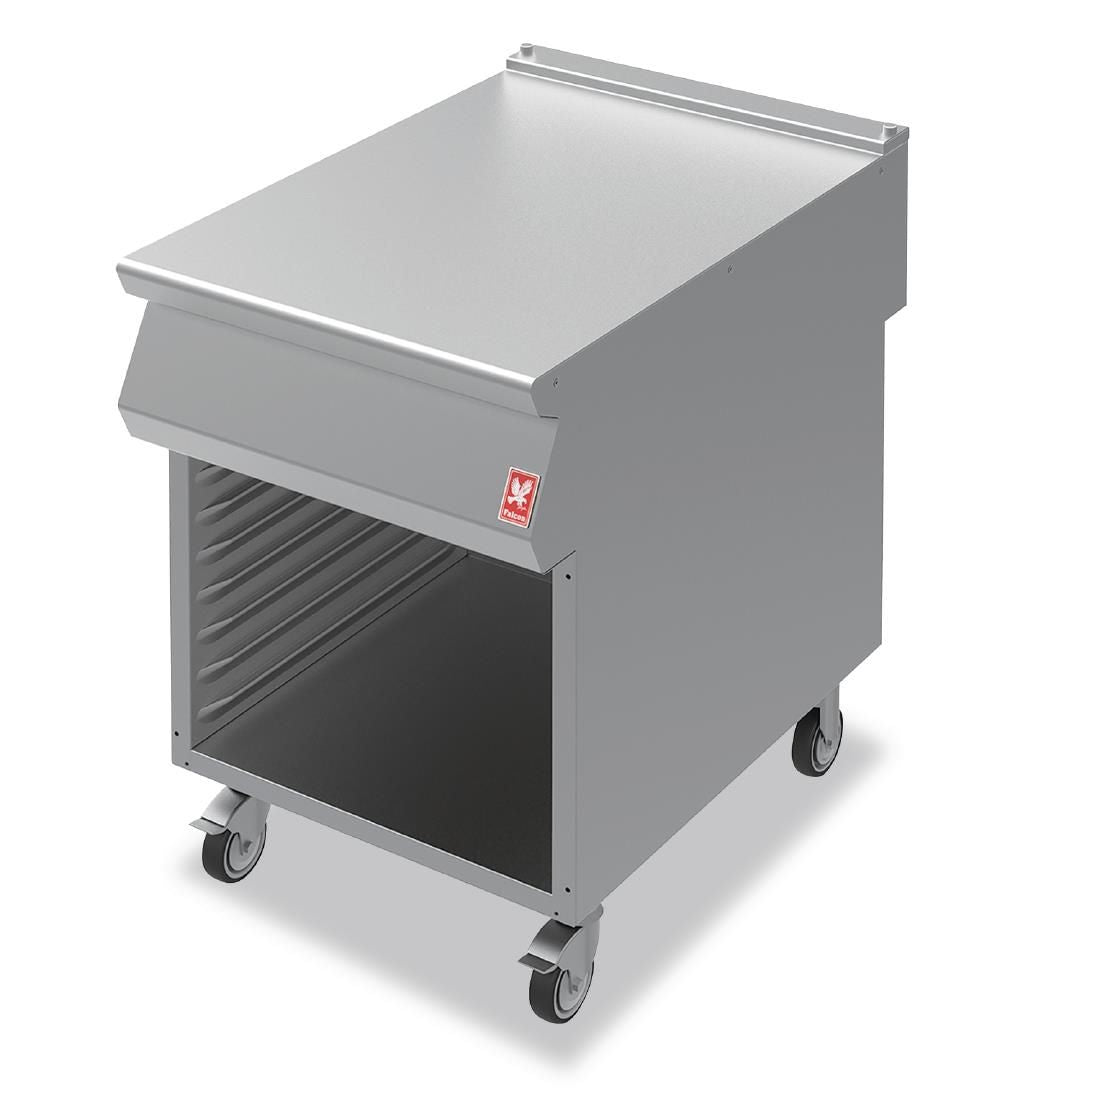 Falcon F900 Open Cabinet With Pressed Runners on Castors JD Catering Equipment Solutions Ltd